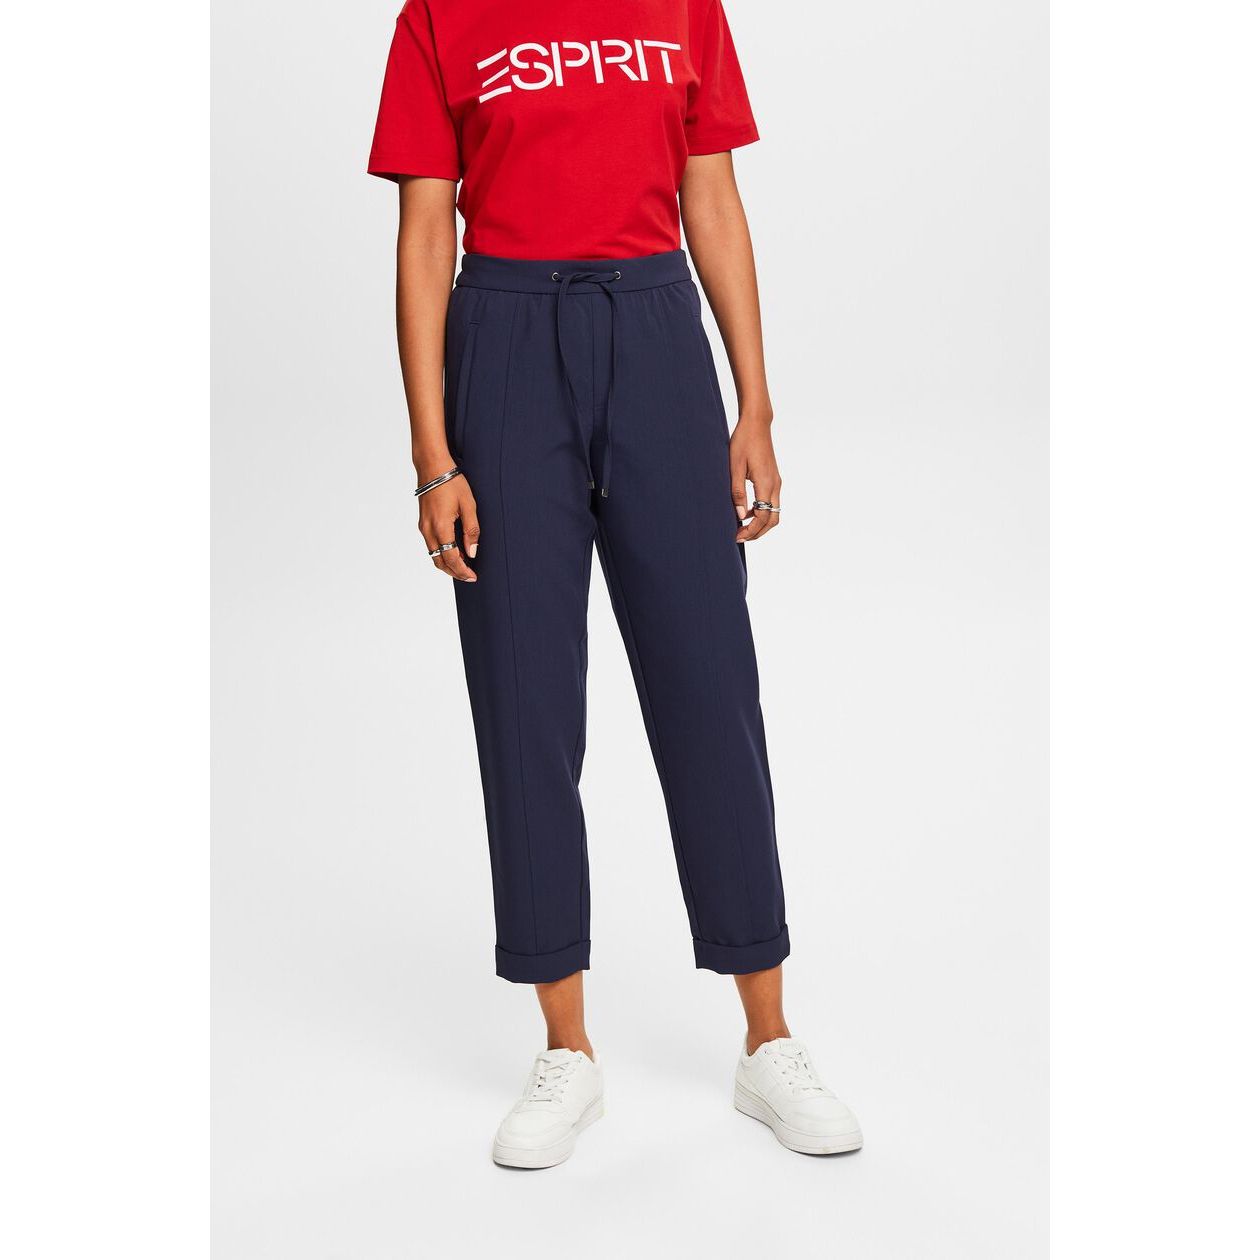 Esprit - Jogger Style Trouser in Navy